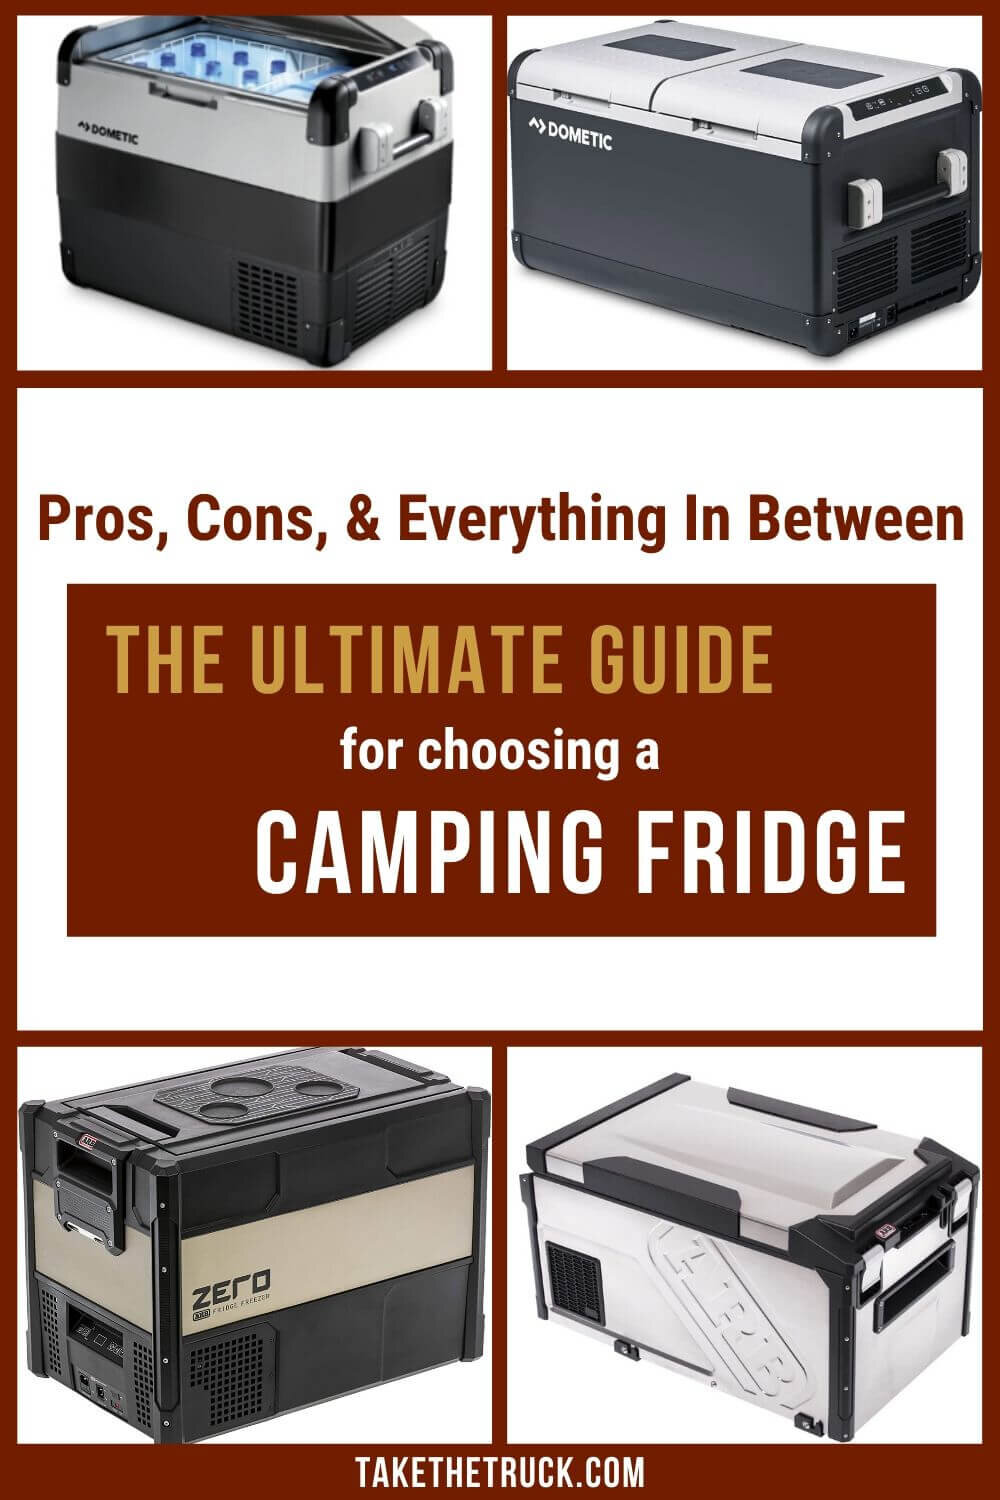 All you need to know before choosing the best camping fridge for your needs and wants! A portable fridge when camping is a huge upgrade from a cooler. Step by step tips on finding a camping fridge.